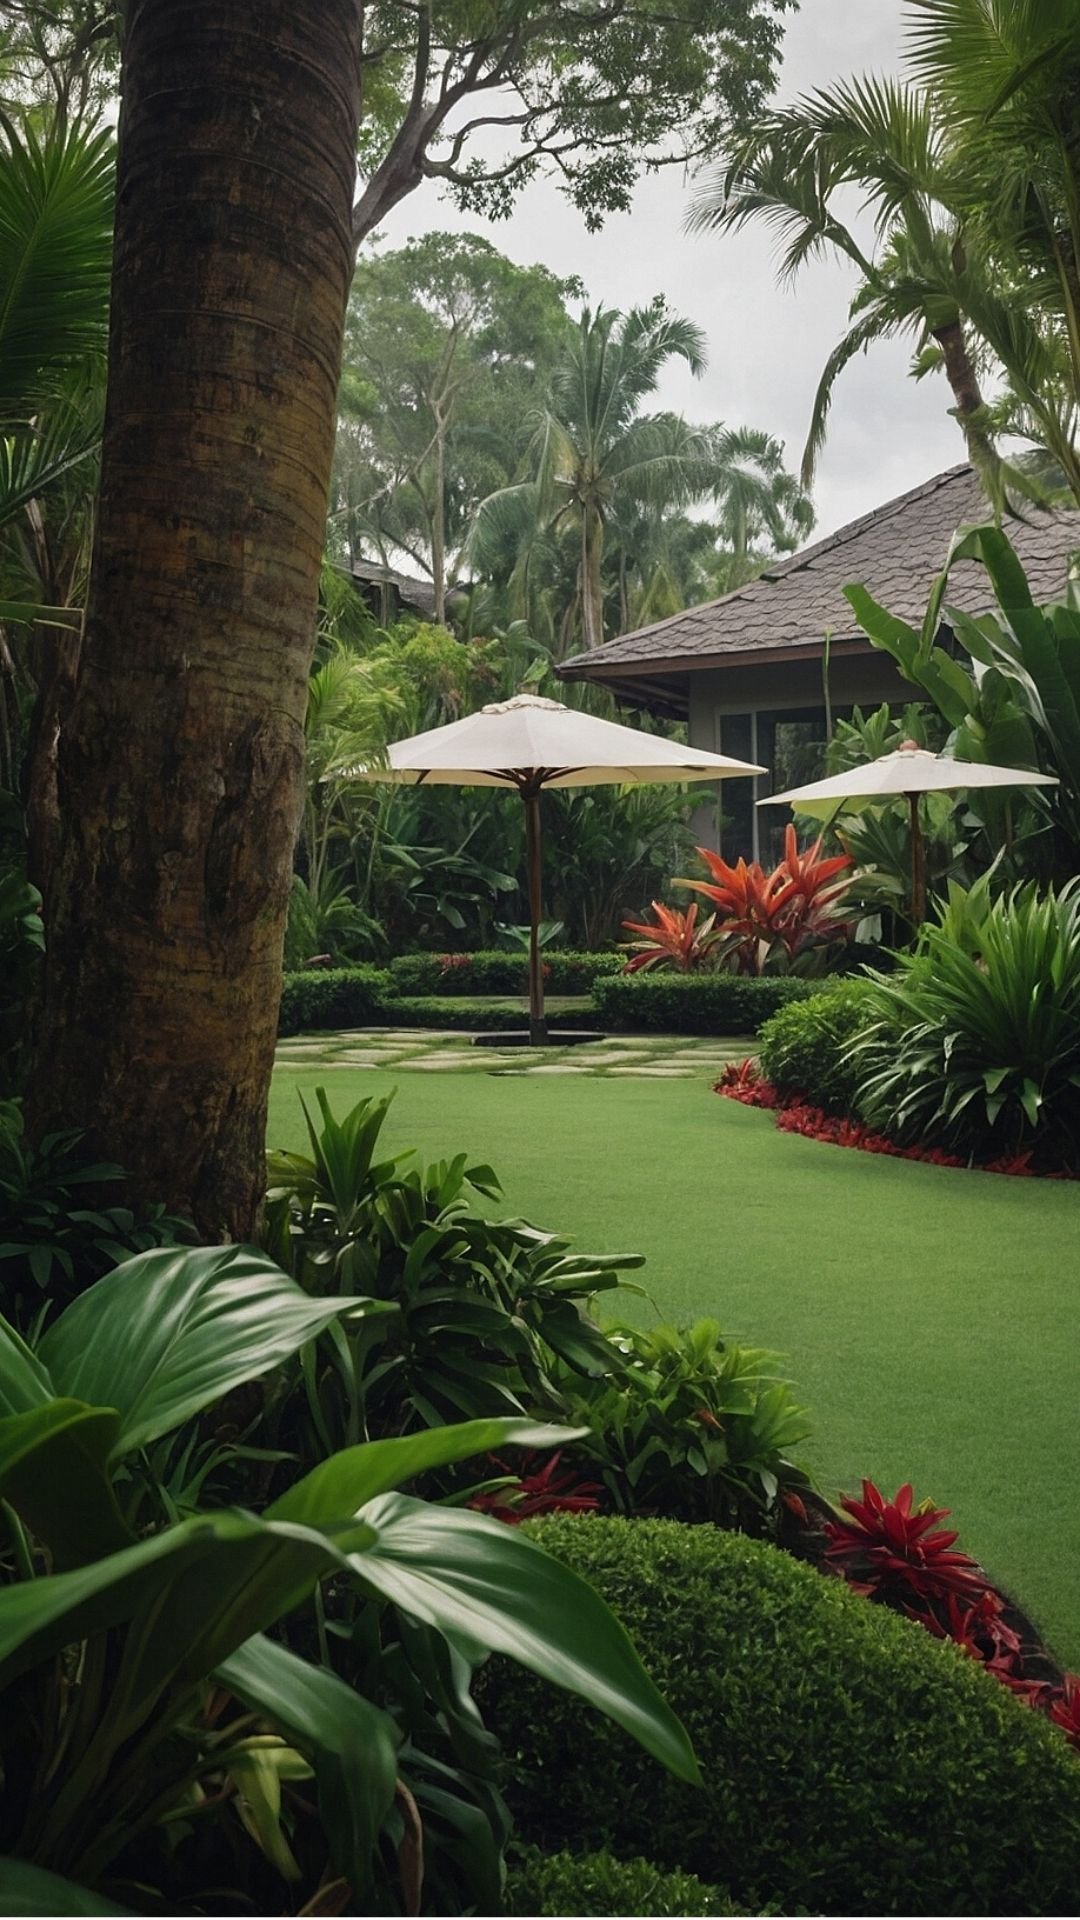 Tropical Oasis: Luxurious Garden with Sun Loungers and Umbrellas